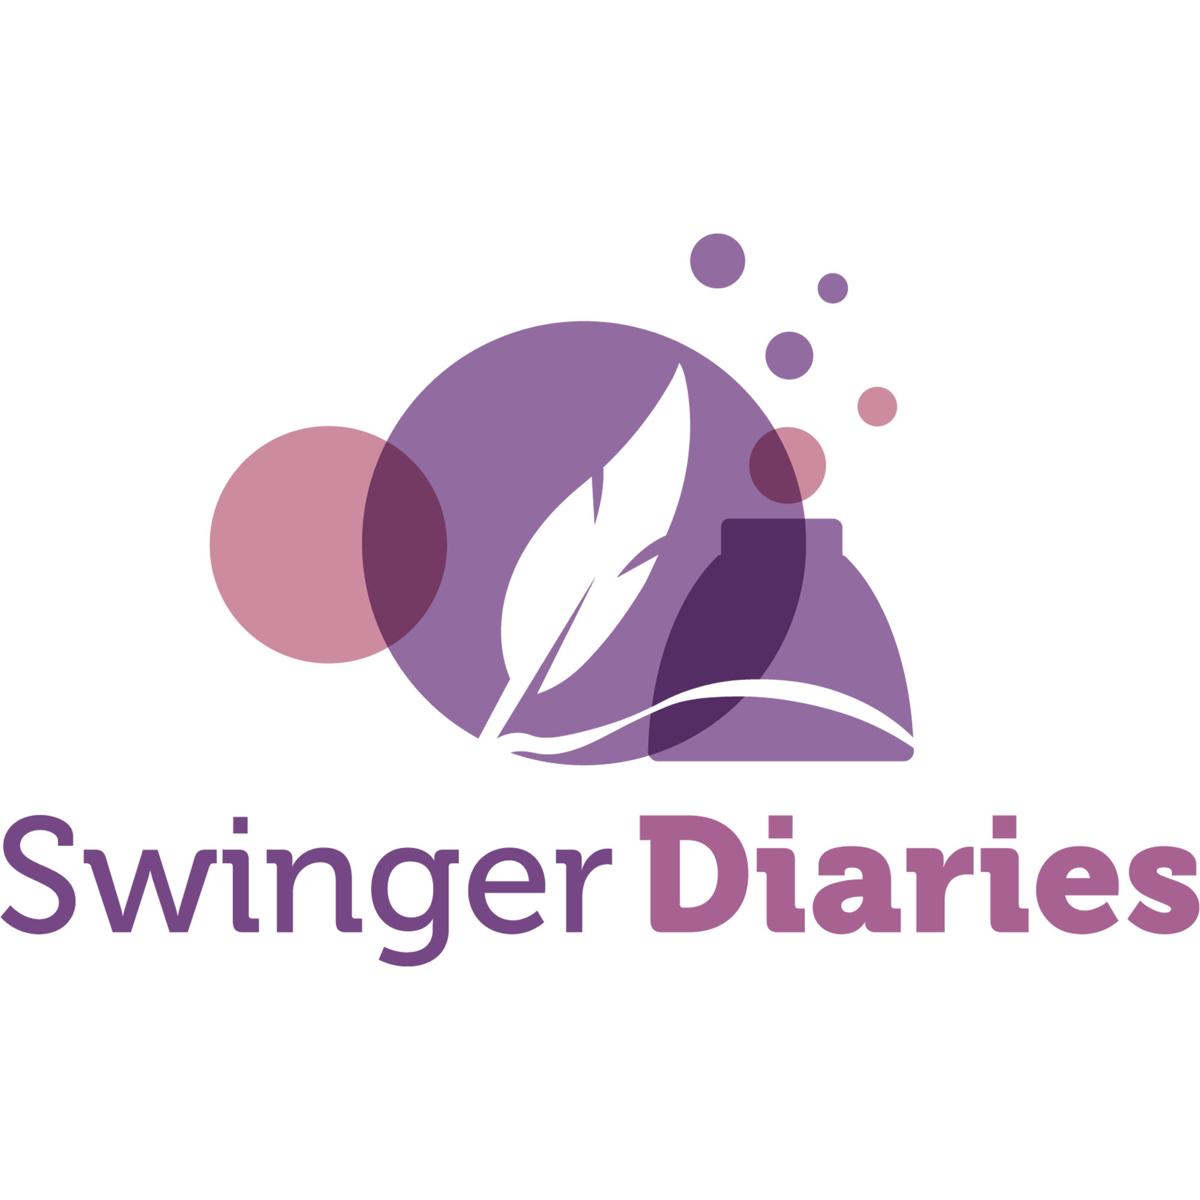 Swinger Diaries Podcast Podyssey picture picture